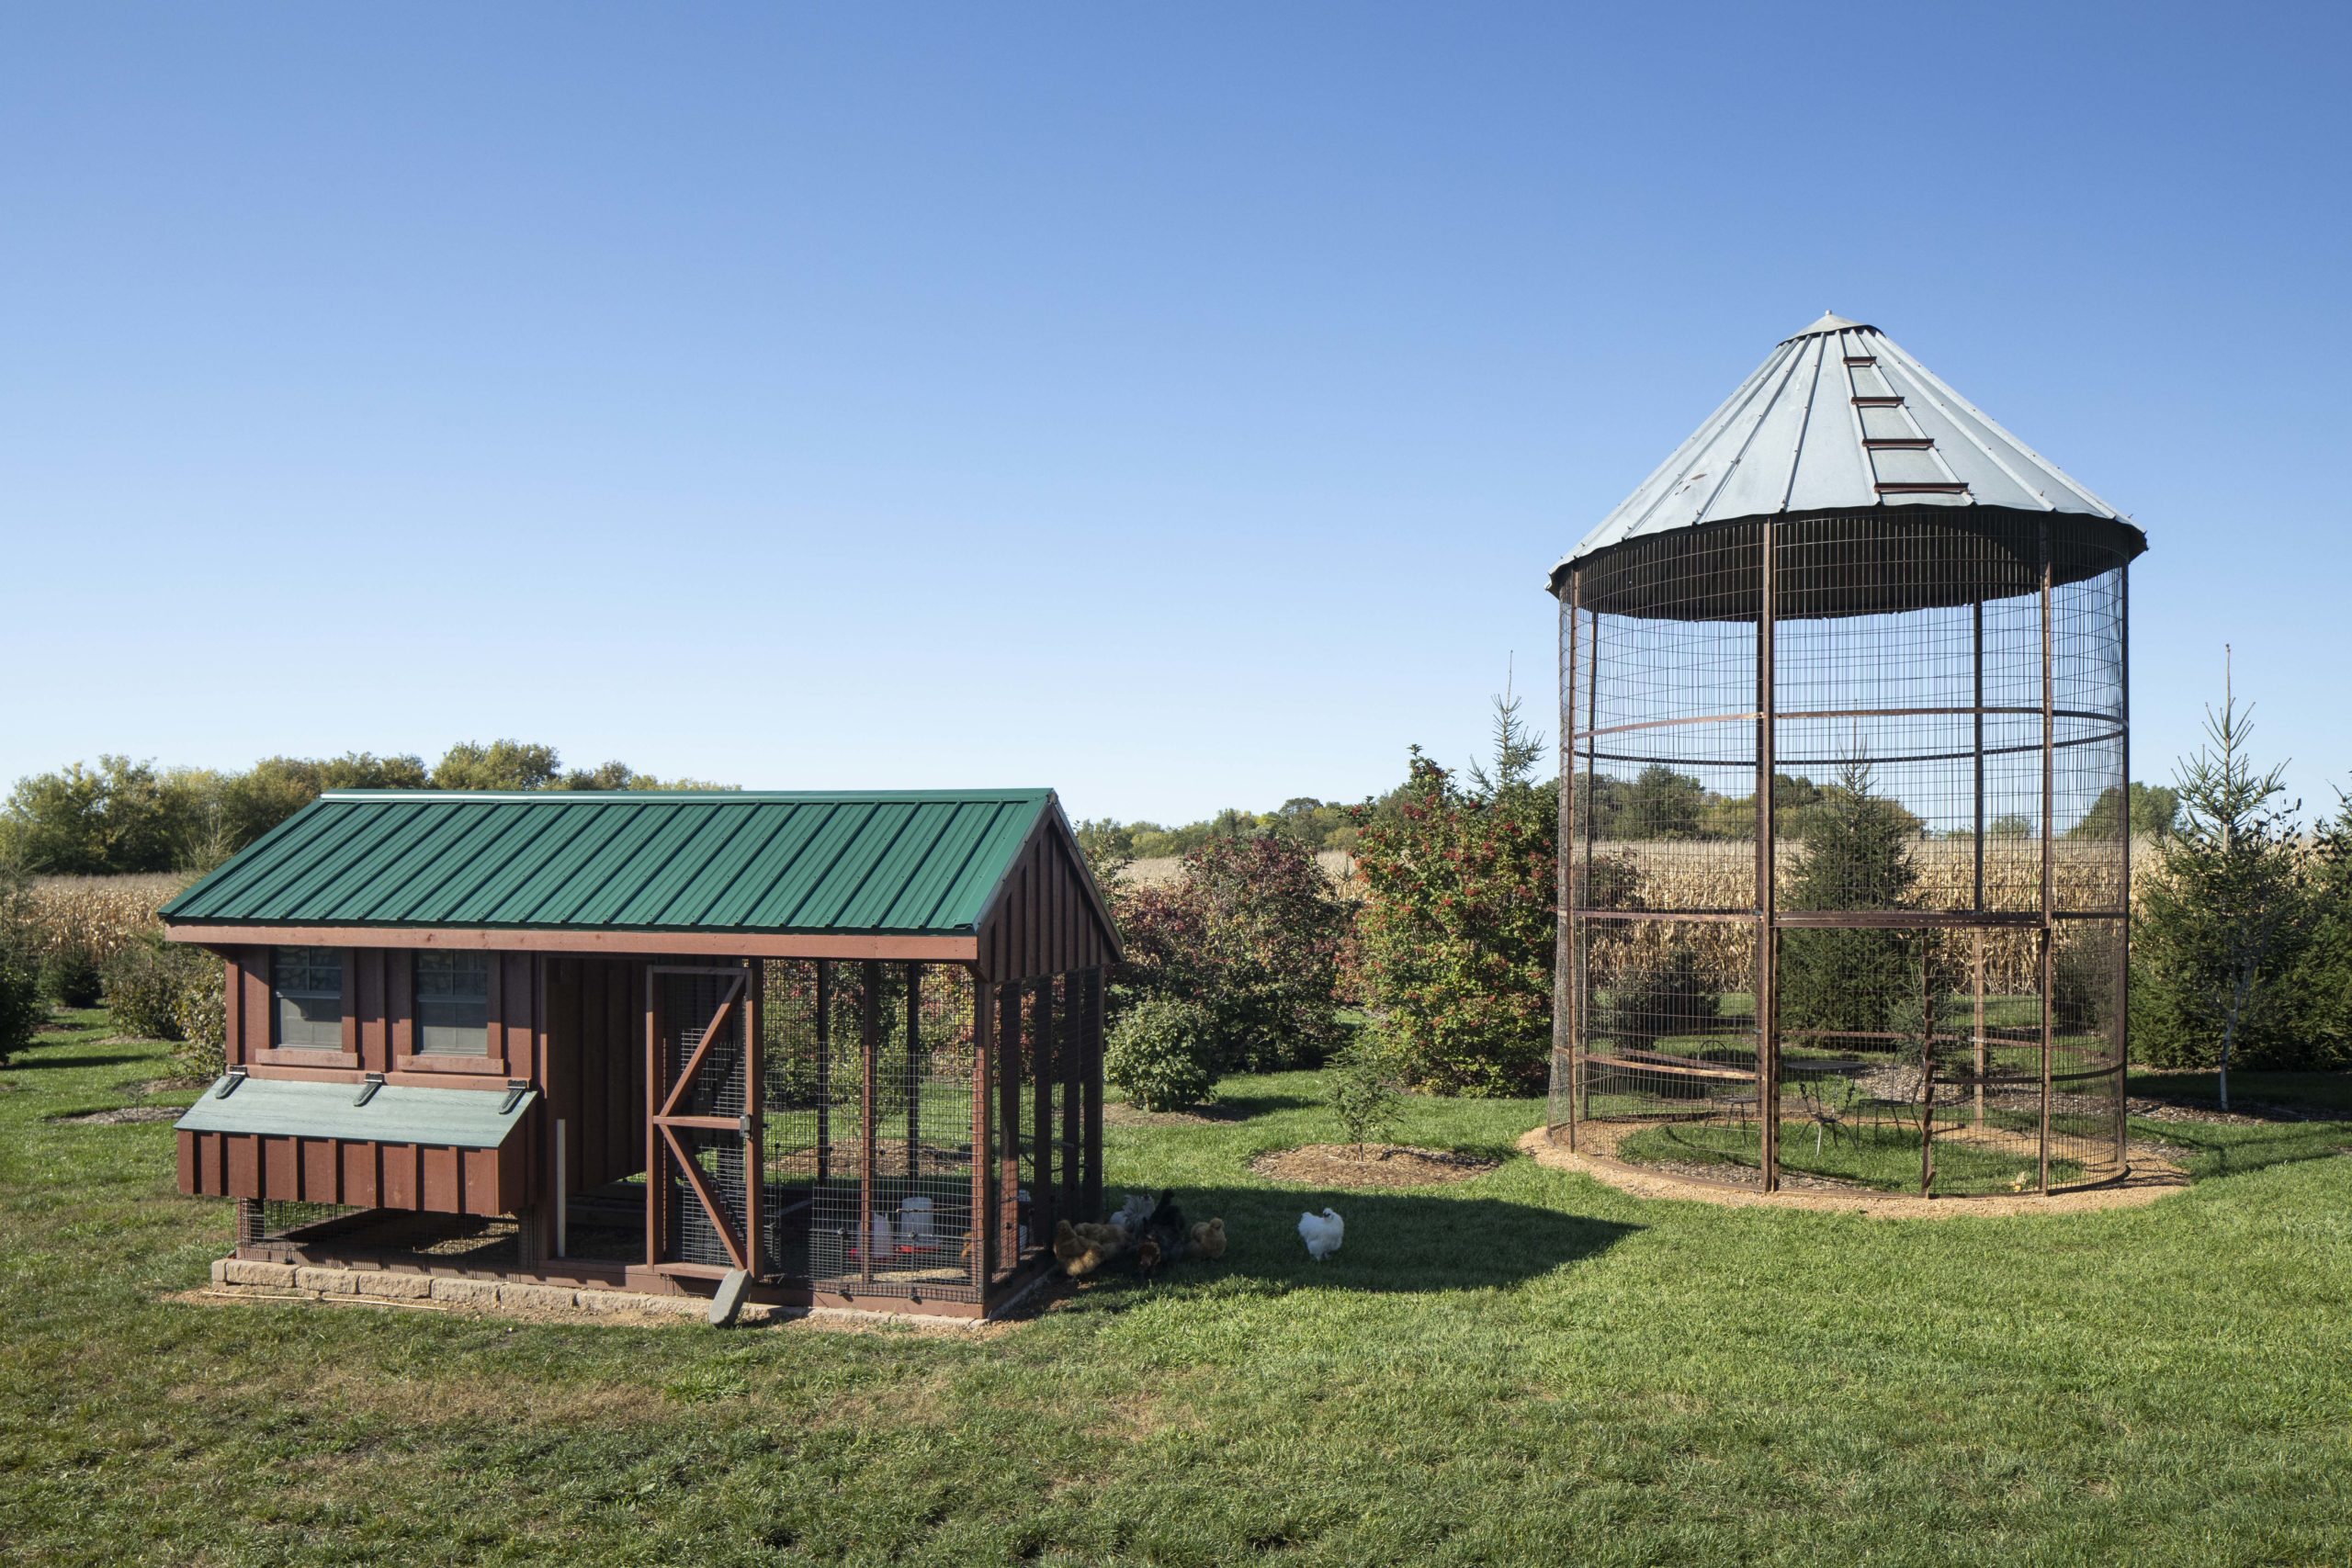 A custom chicken coop situated in the middle of a prairie field, with a unique water tower as its centerpiece.